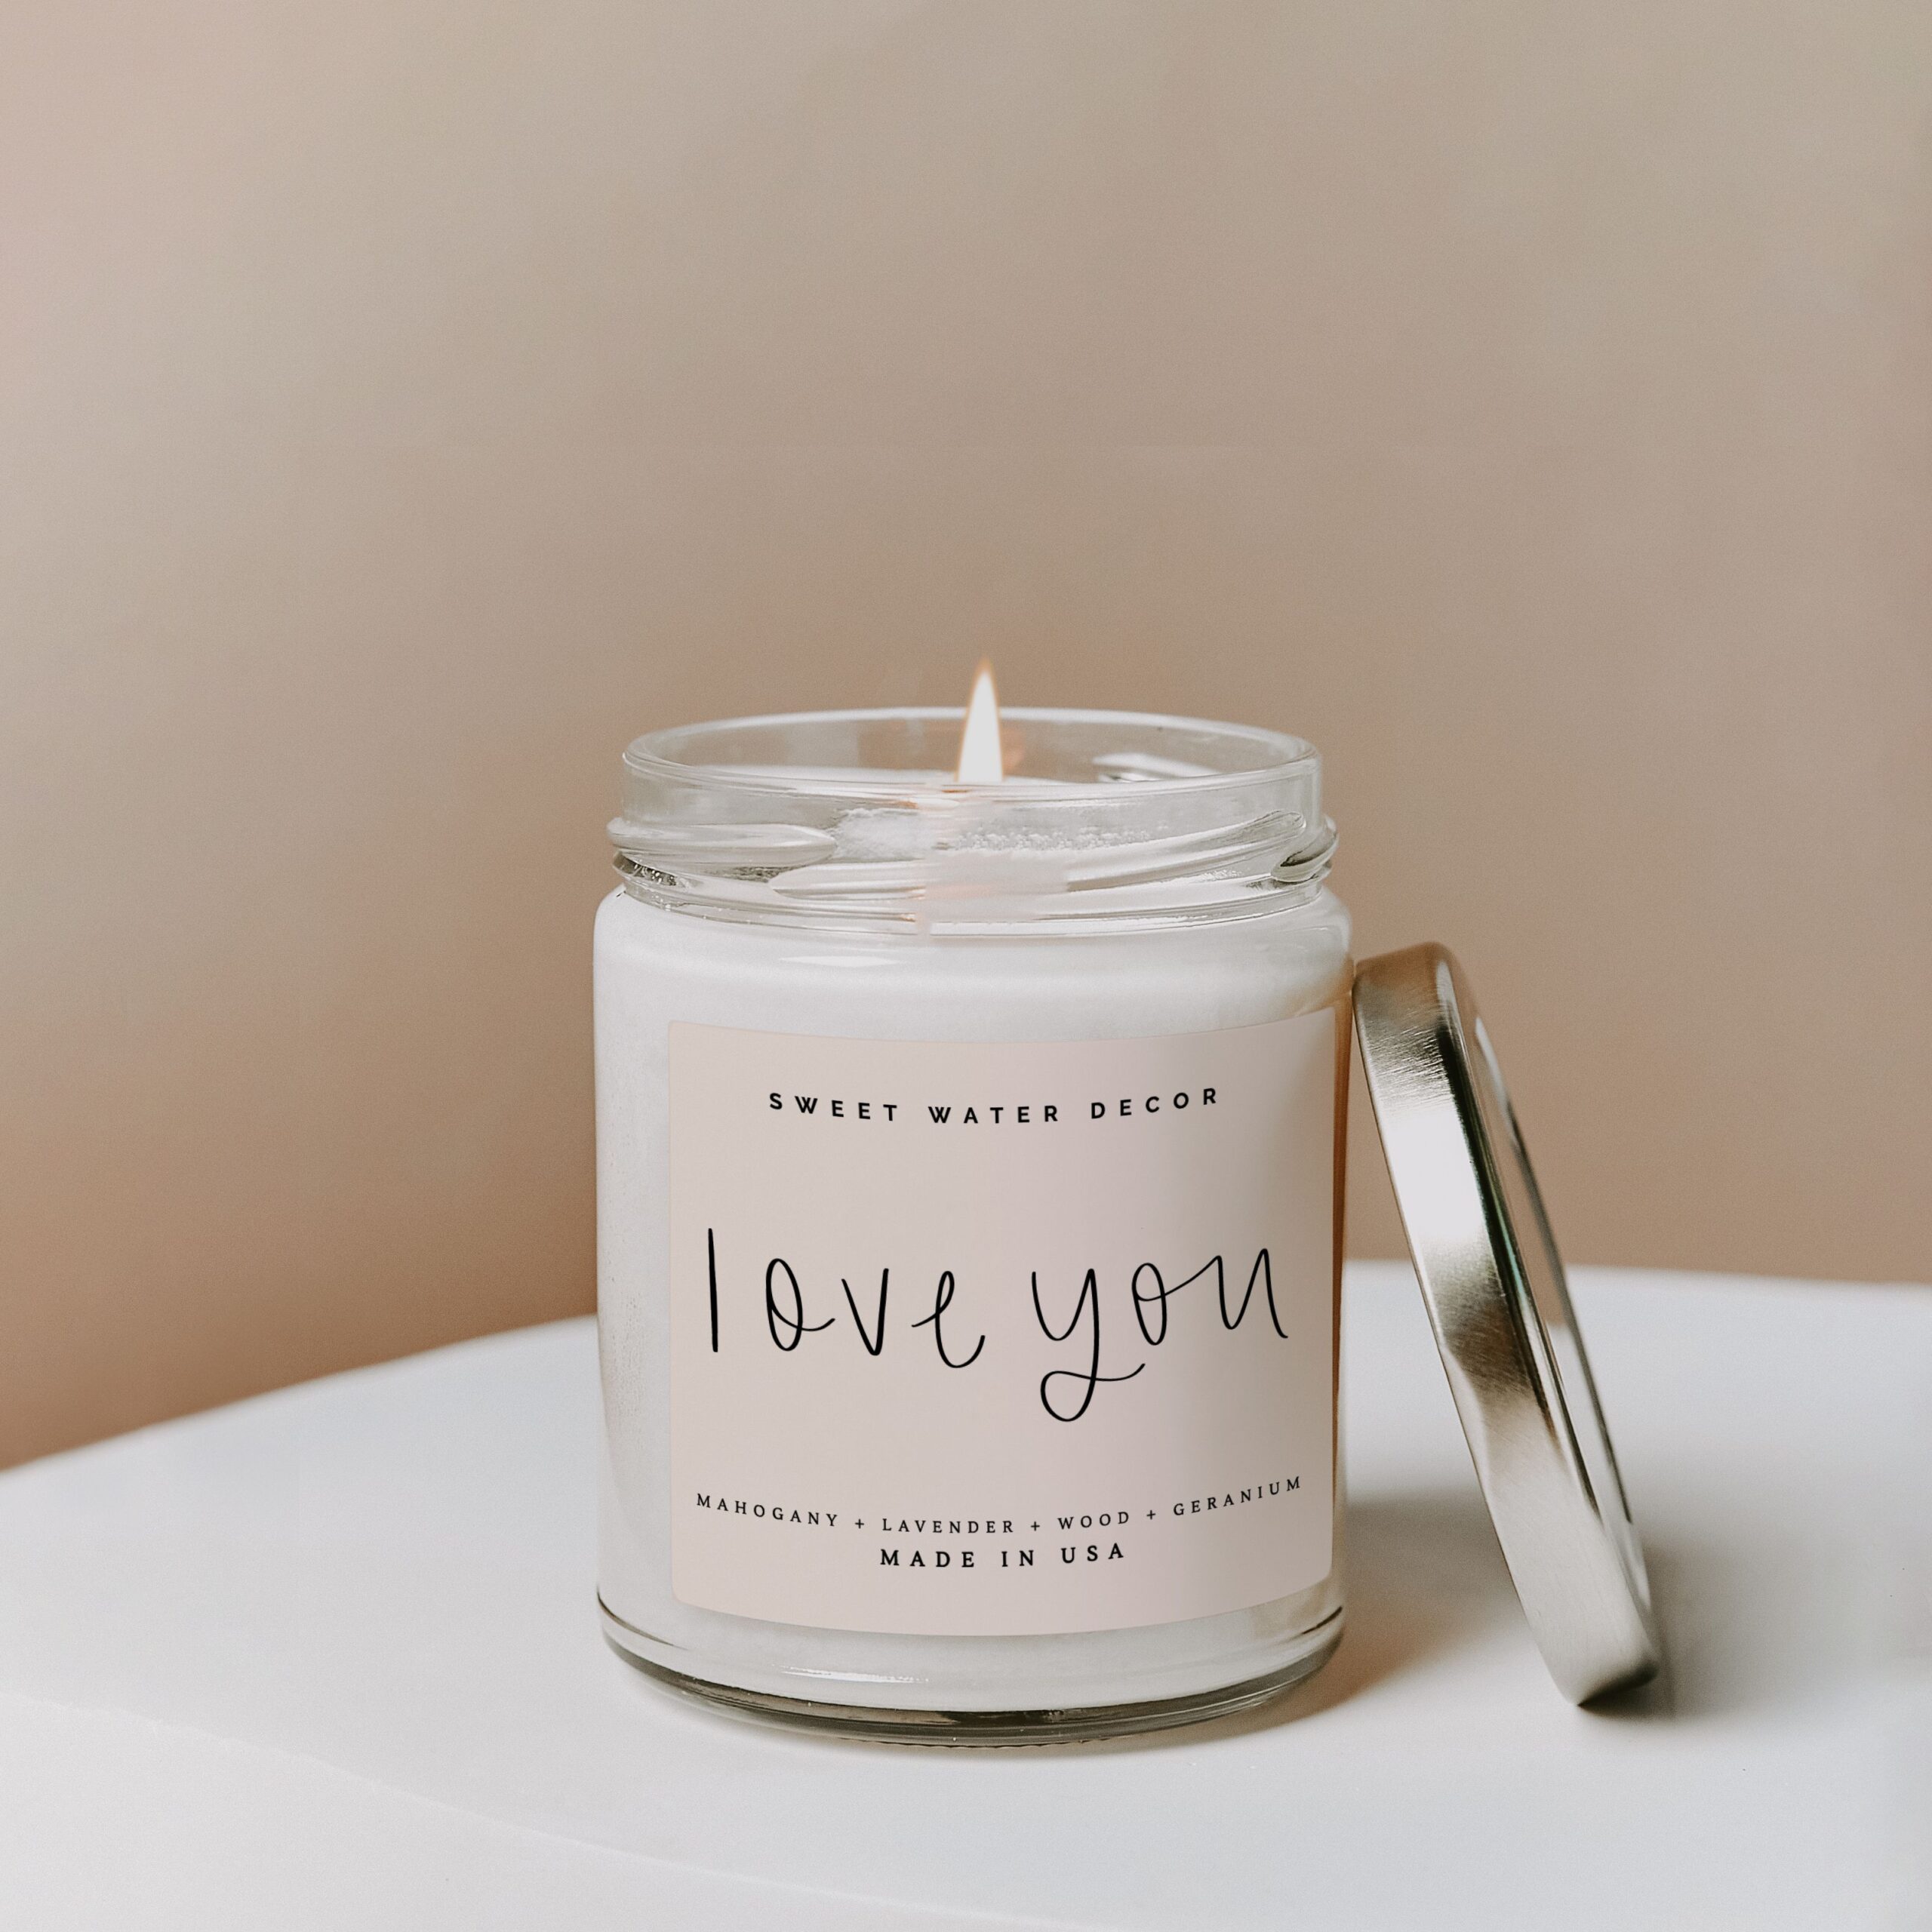 Love you candle on a white flat surface